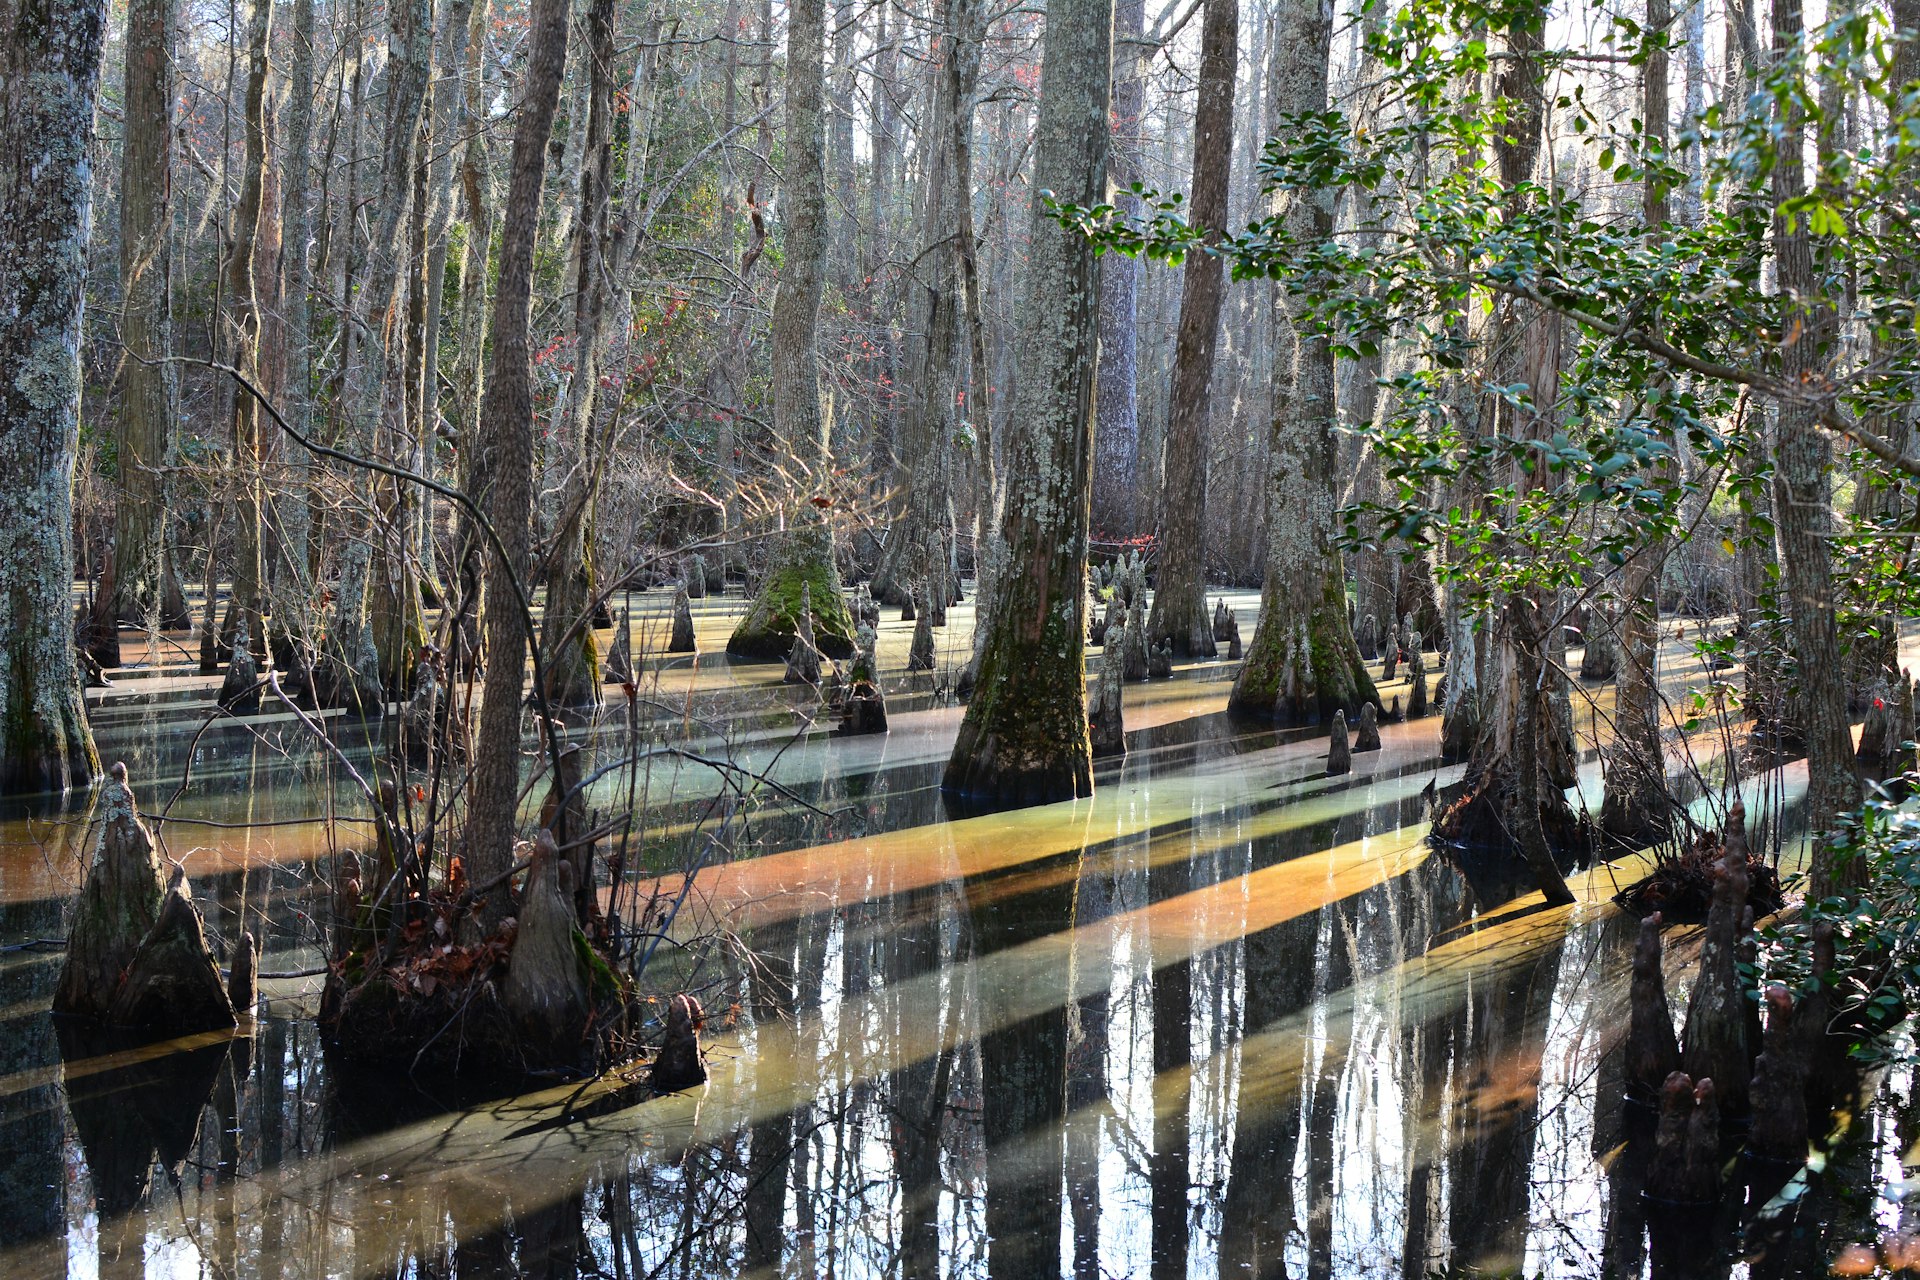 Rainbow light effects reflected on the cypress swamp of First Landing State Park, Virginia Beach, VA